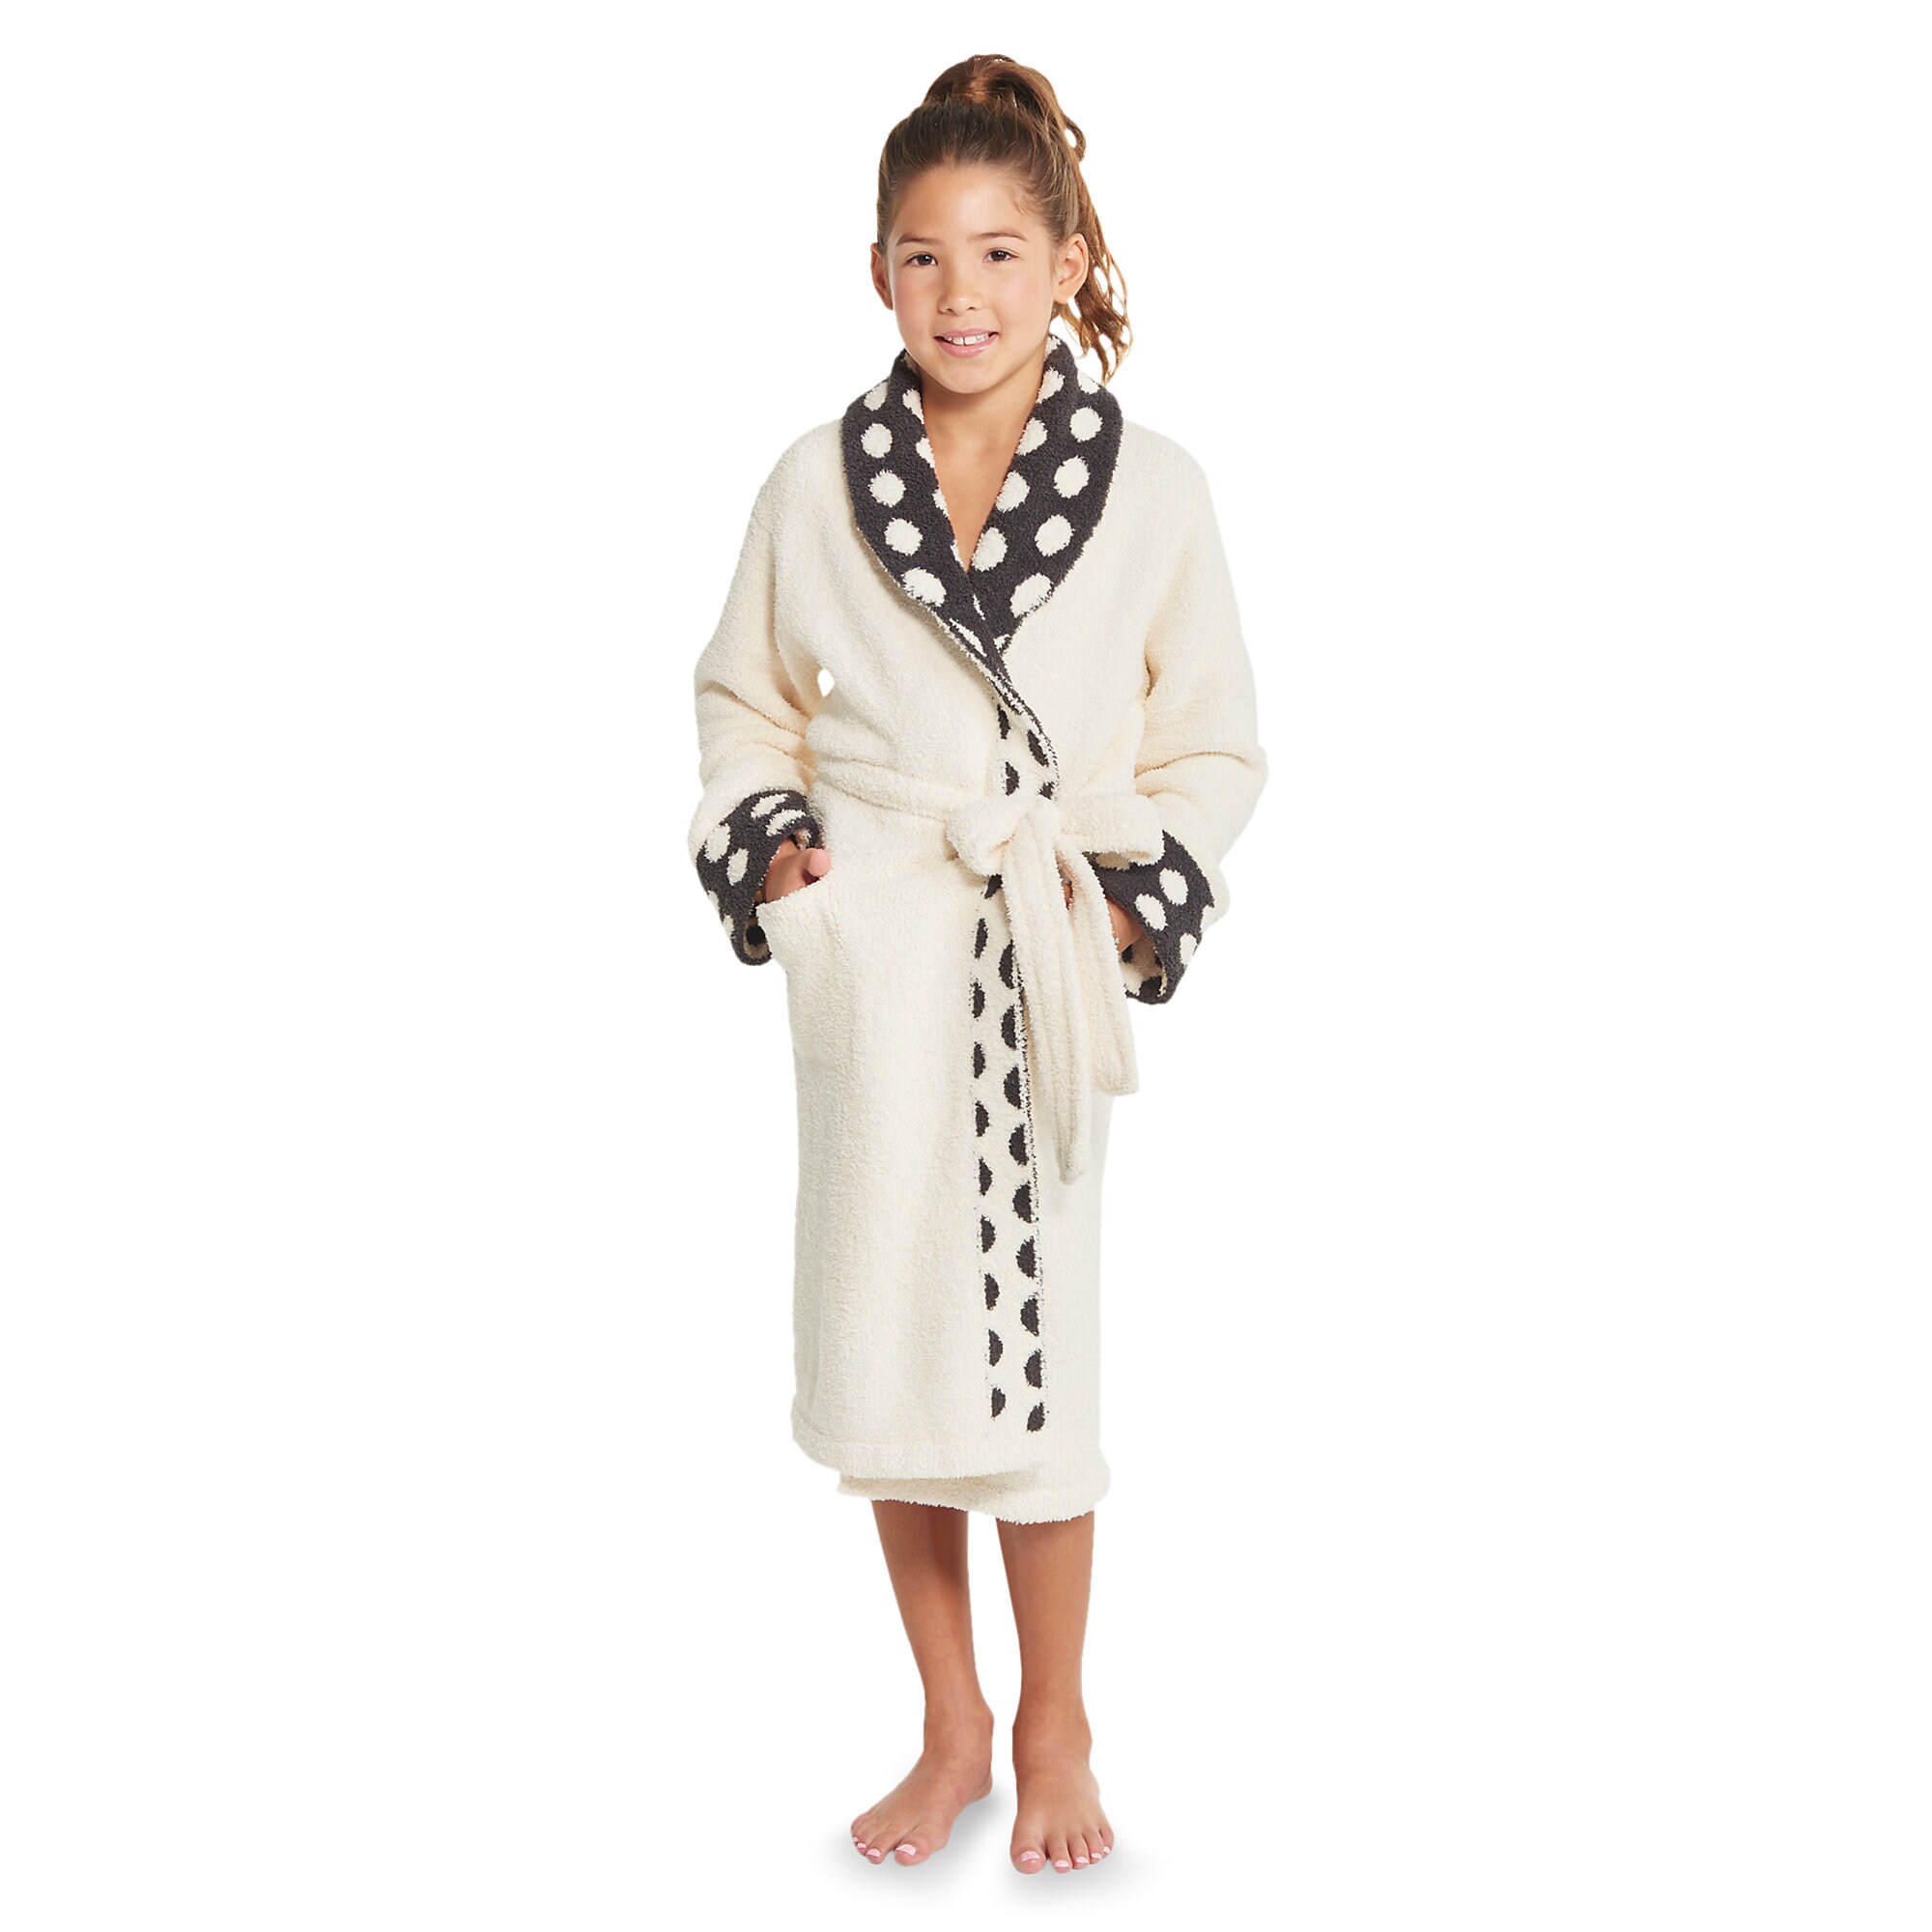 Minnie Mouse Robe for Tweens by Barefoot Dreams